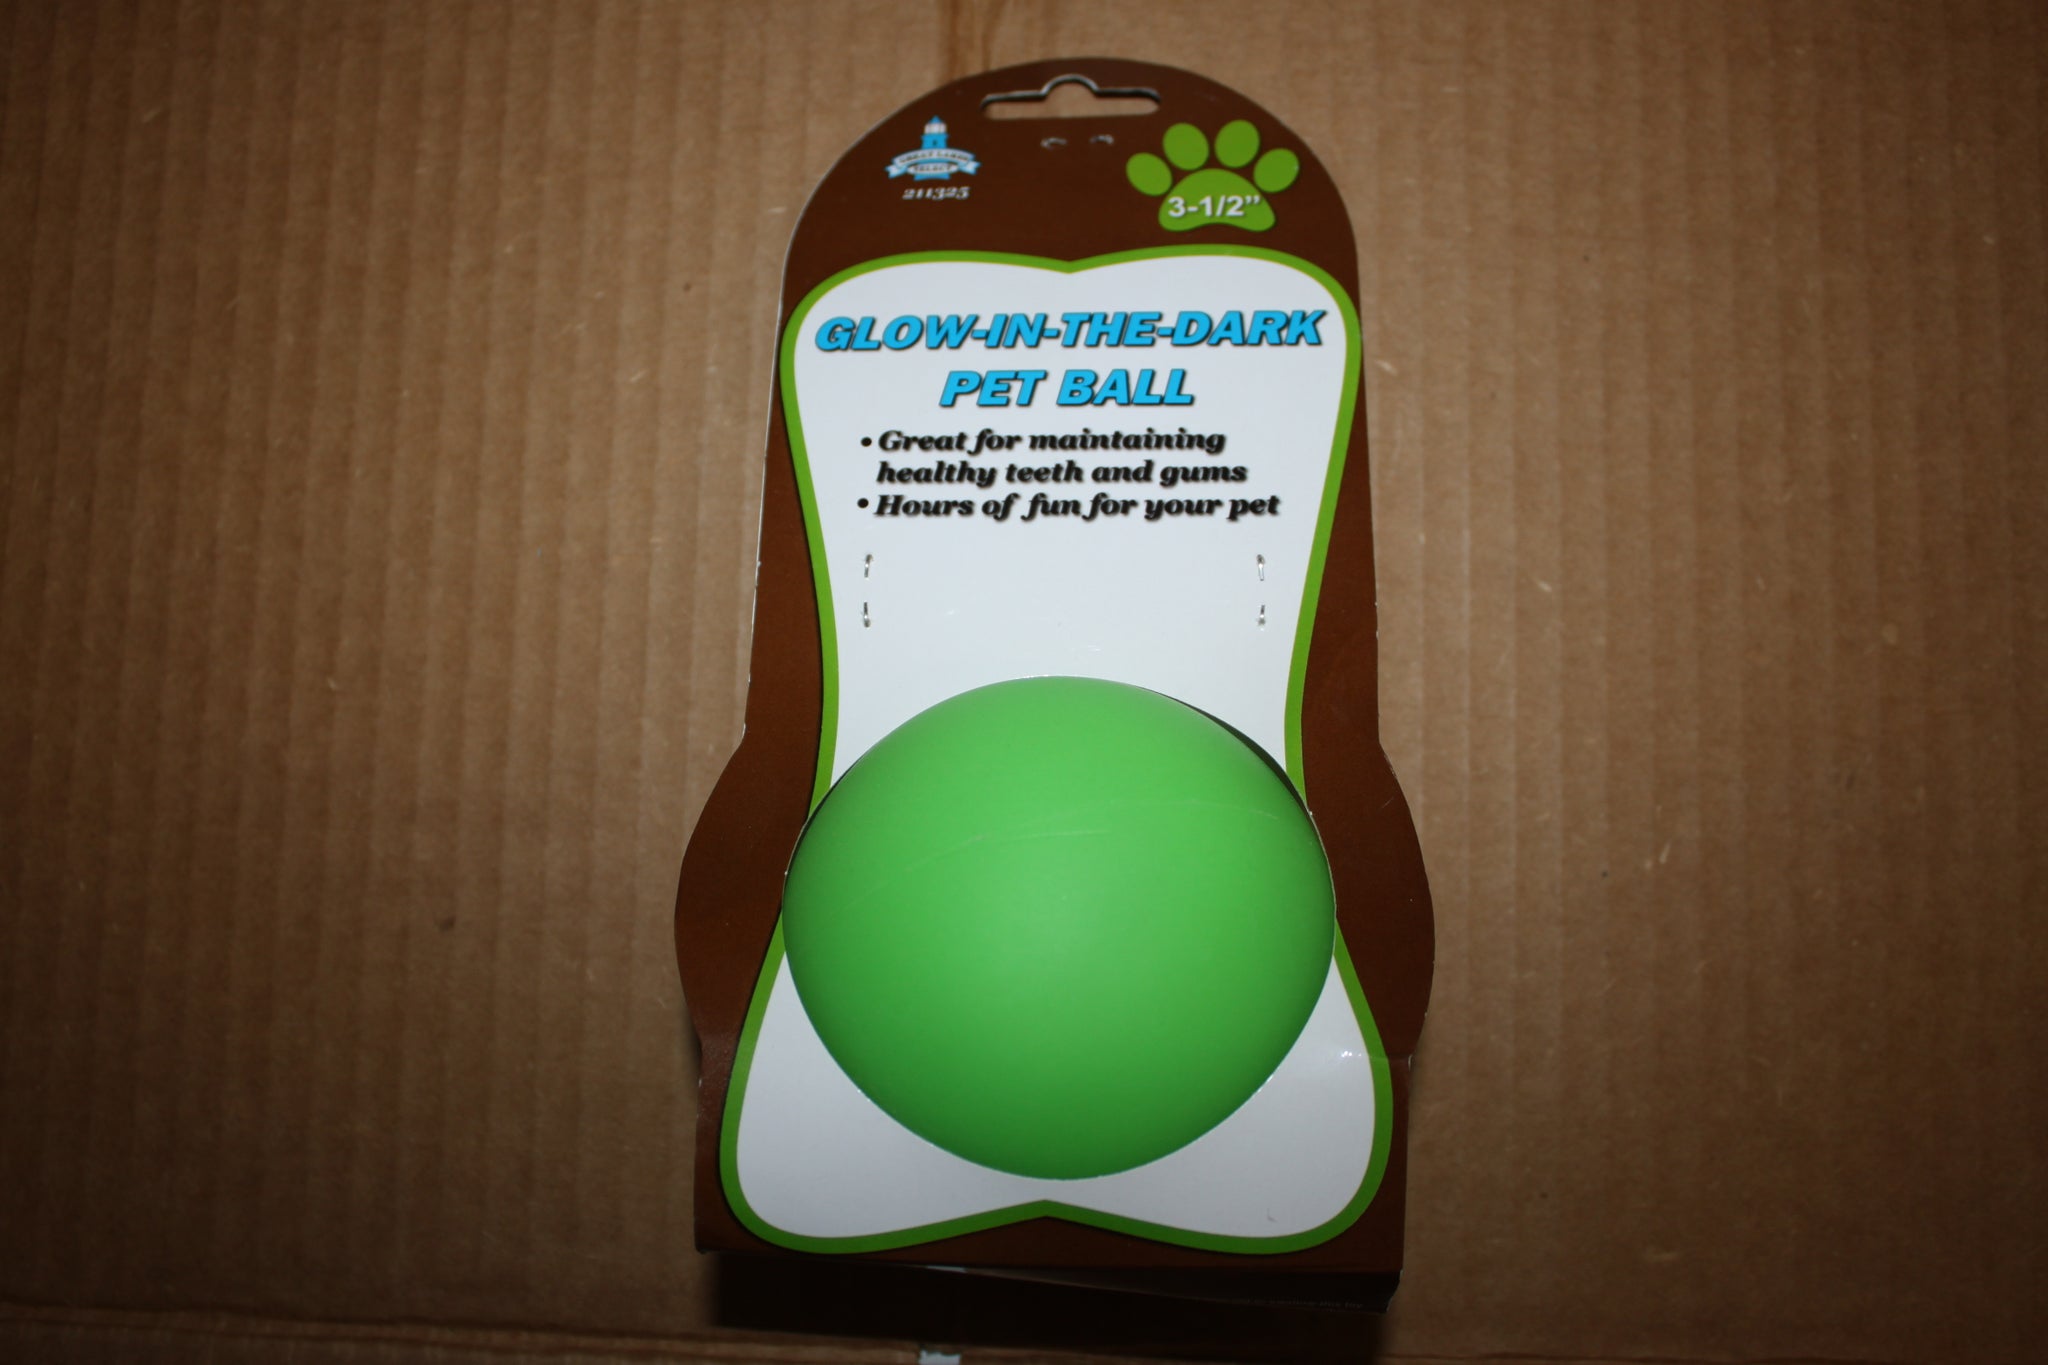 3-1/2" Glow in the Dark Rubber Pet Ball Squeaky Toy